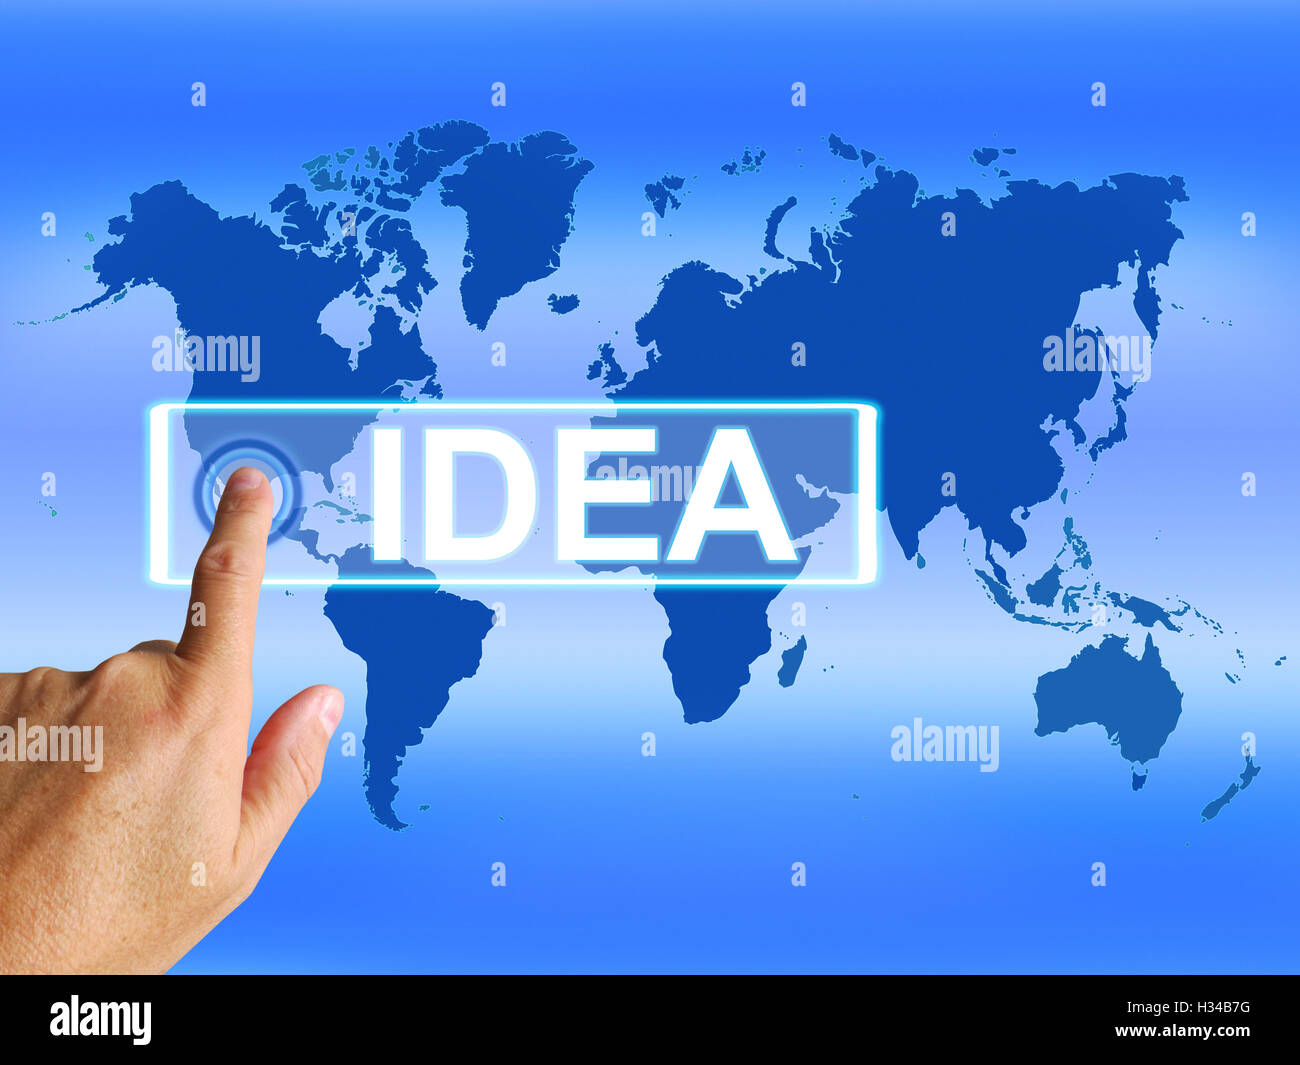 Idea Map Means Worldwide Concepts Thoughts or Ideas Stock Photo